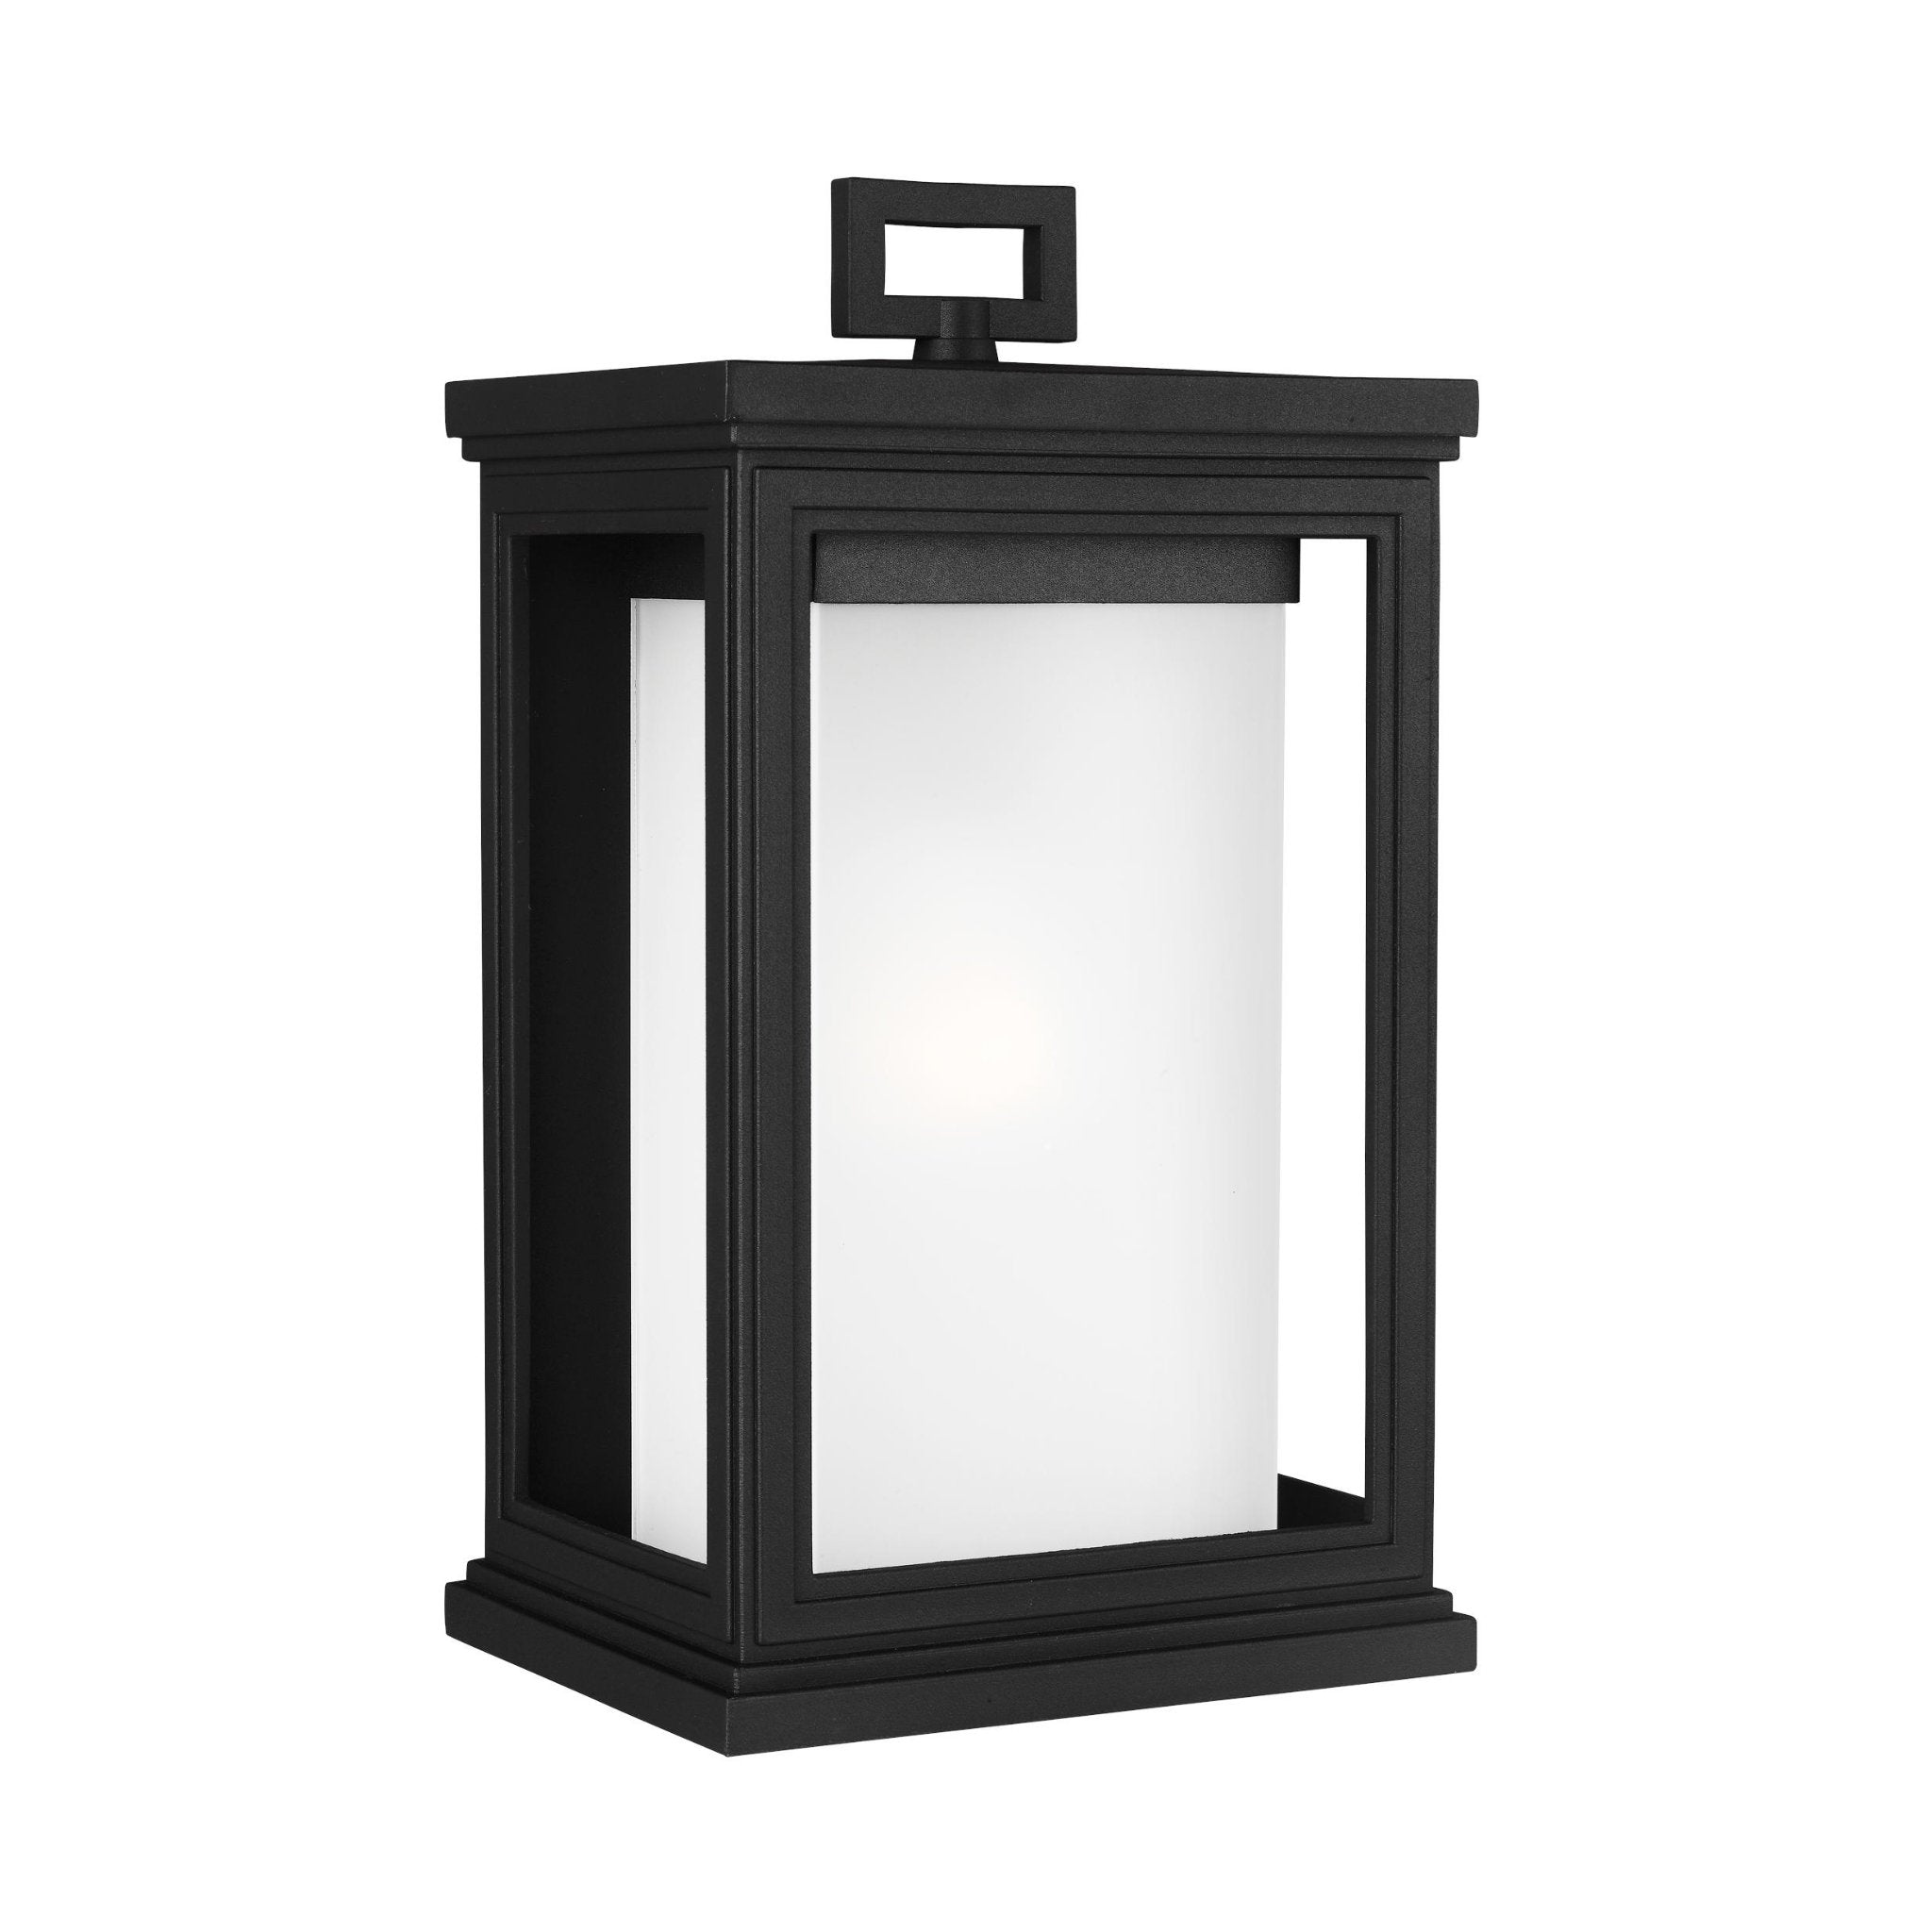 Roscoe Medium Lantern Transitional Outdoor Fixture 7.5" Width 13.5" Height StoneStrong Rectangular White Opal Etched Shade in Textured Black